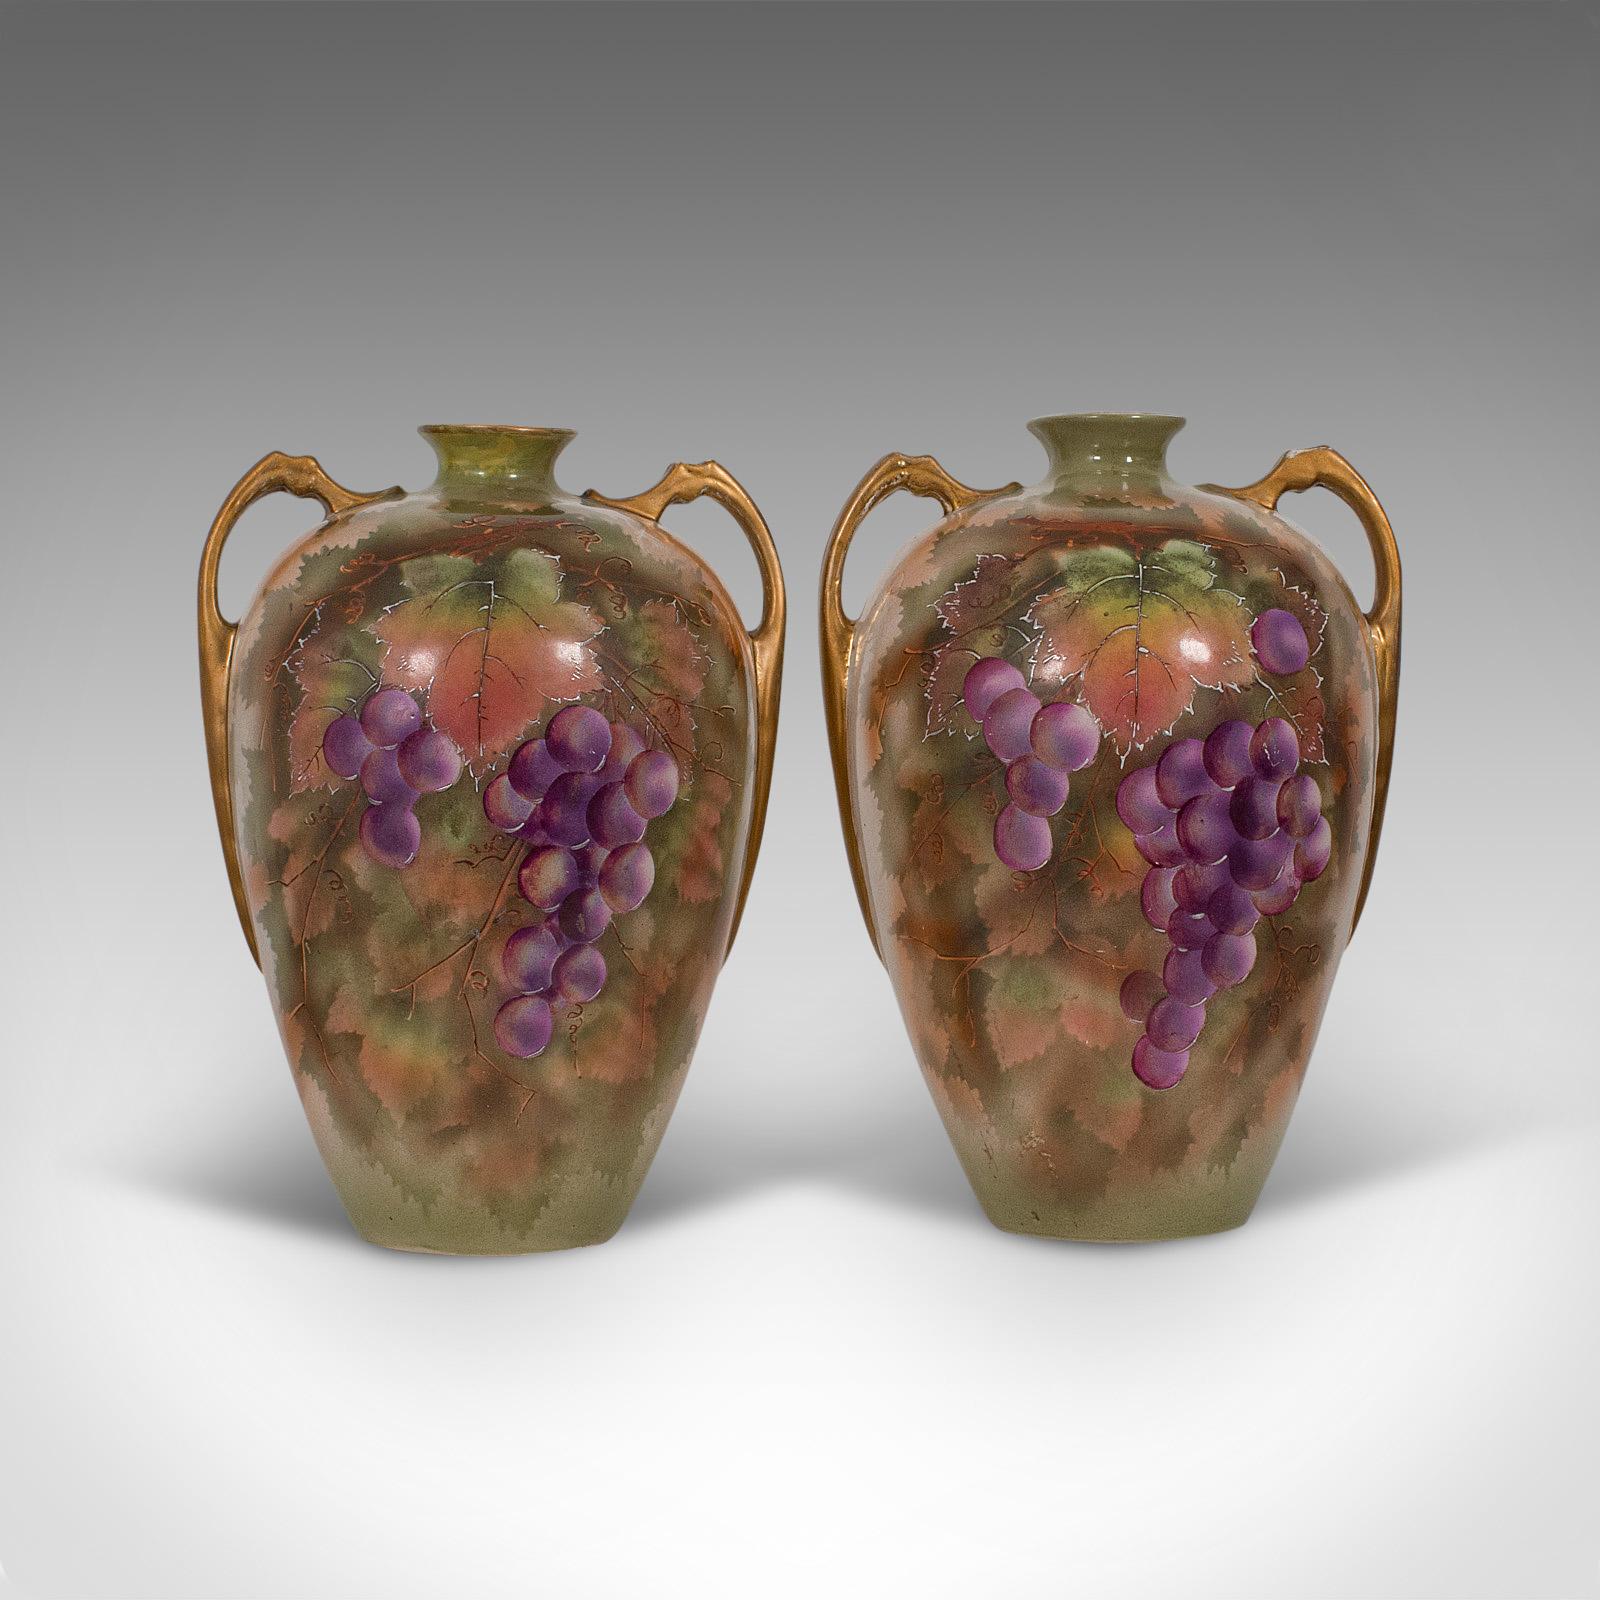 This is a pair of vintage wine Amphora. An English, ceramic decorative vessel with hand painted finish, dating to the mid-20th century, circa 1950.

Appealing English ceramics from the Potteries region
Displaying a desirable aged